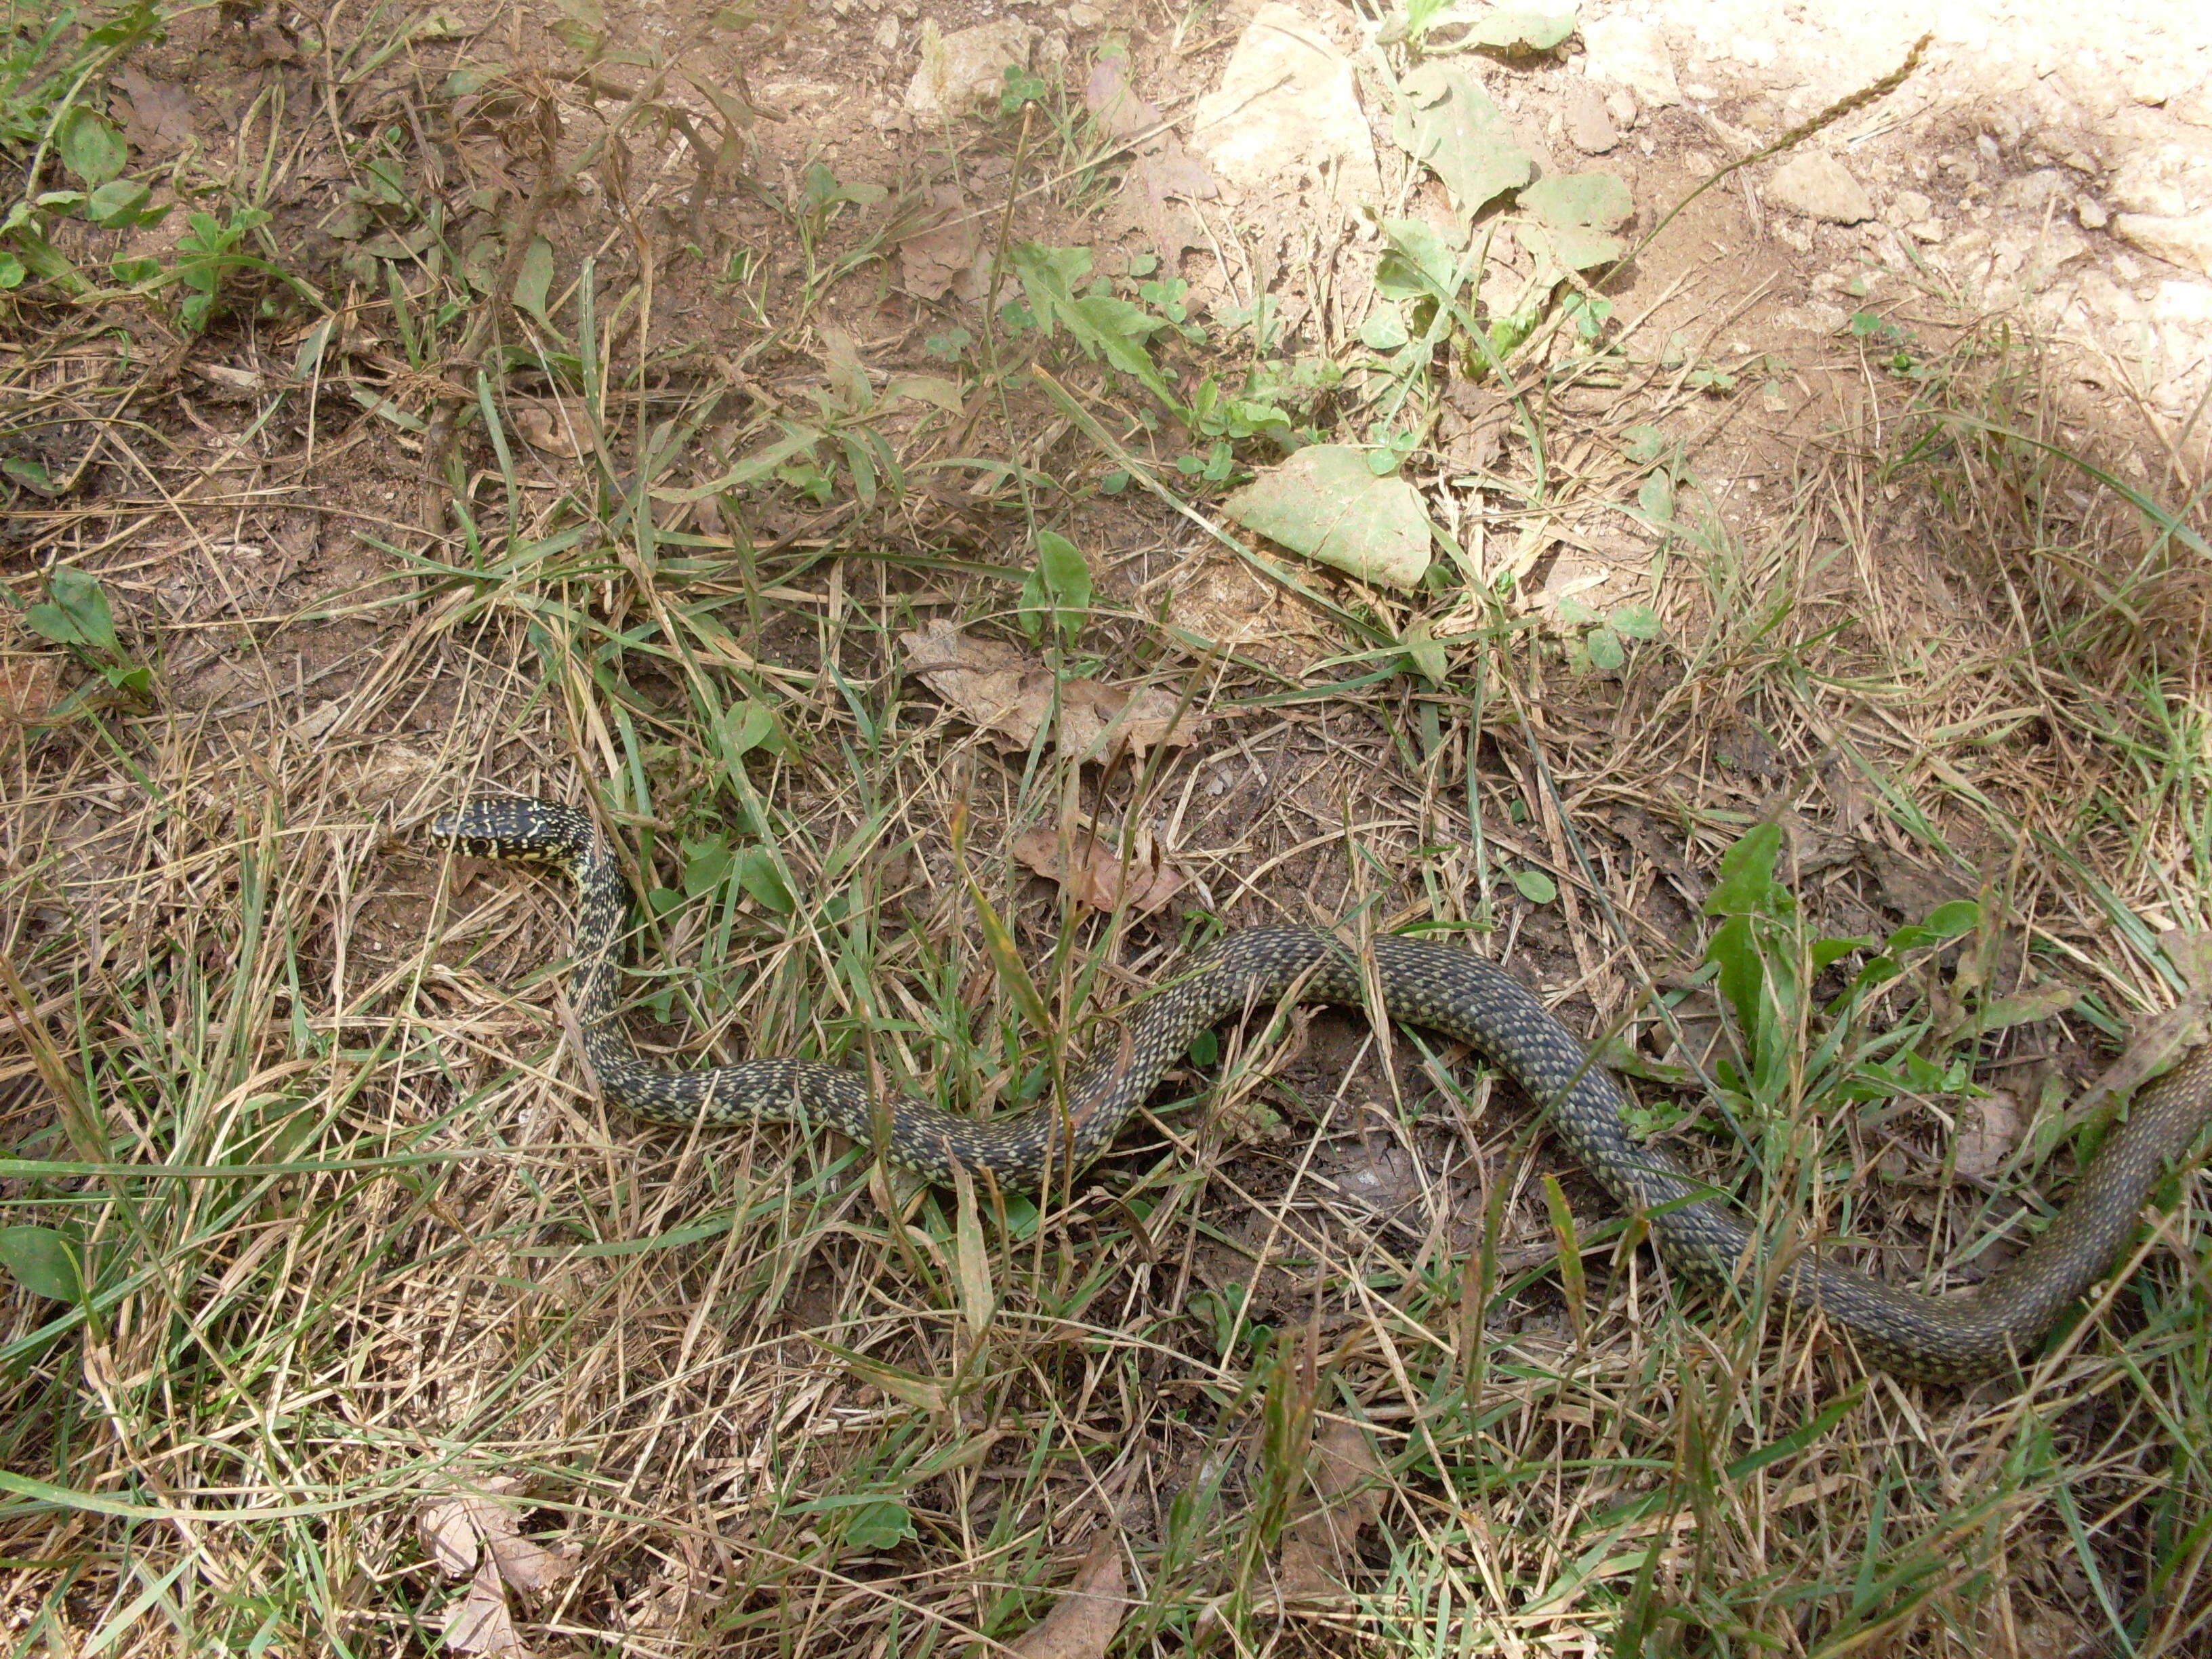 Image of Whip Snakes